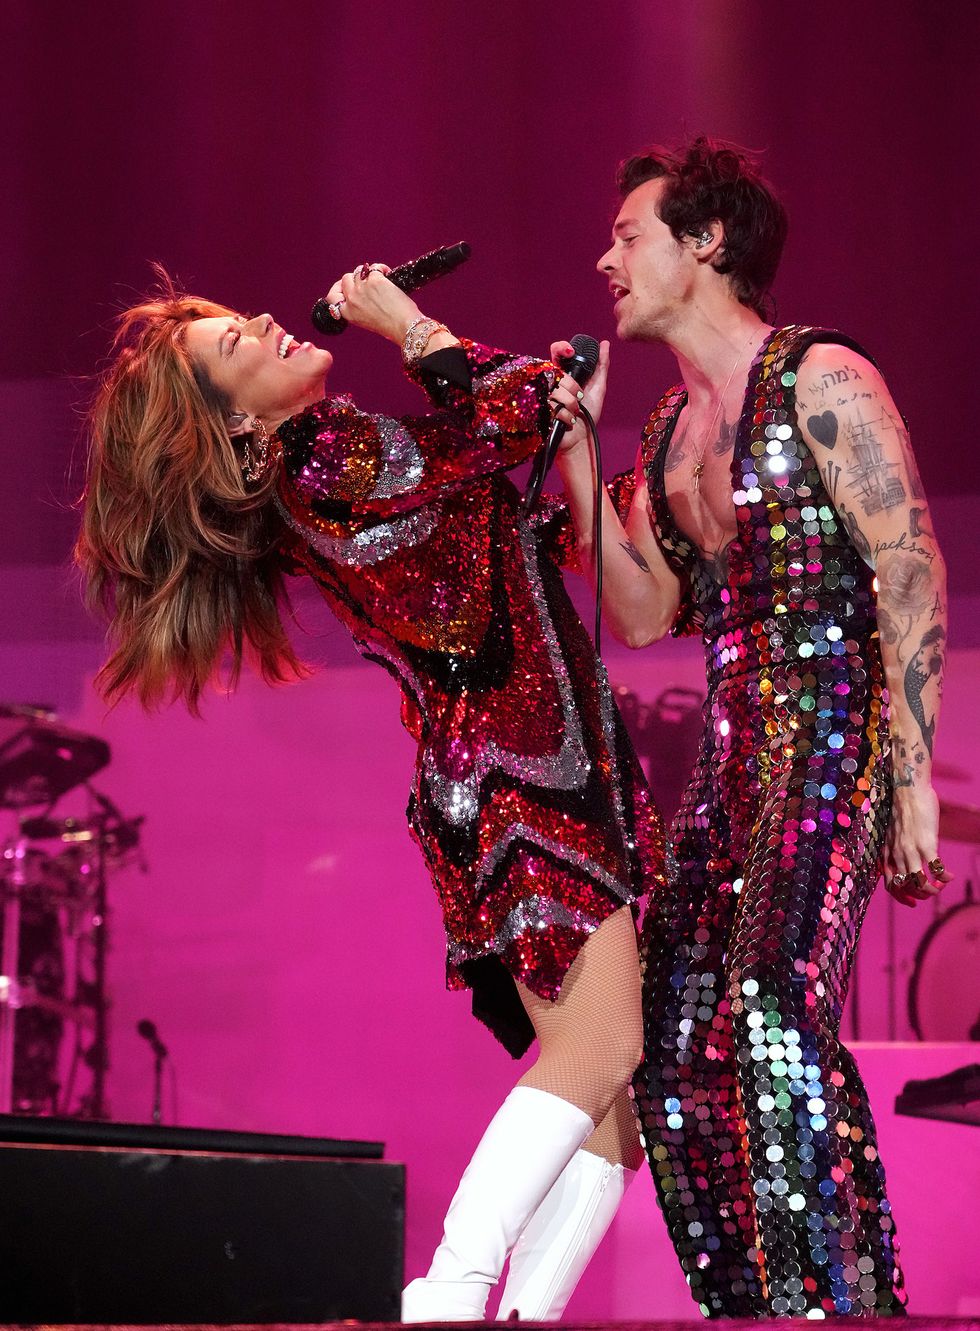 indio, california   april 15 l r shania twain and harry styles perform onstage at the coachella stage during the 2022 coachella valley music and arts festival on april 15, 2022 in indio, california photo by kevin mazurgetty images for aba